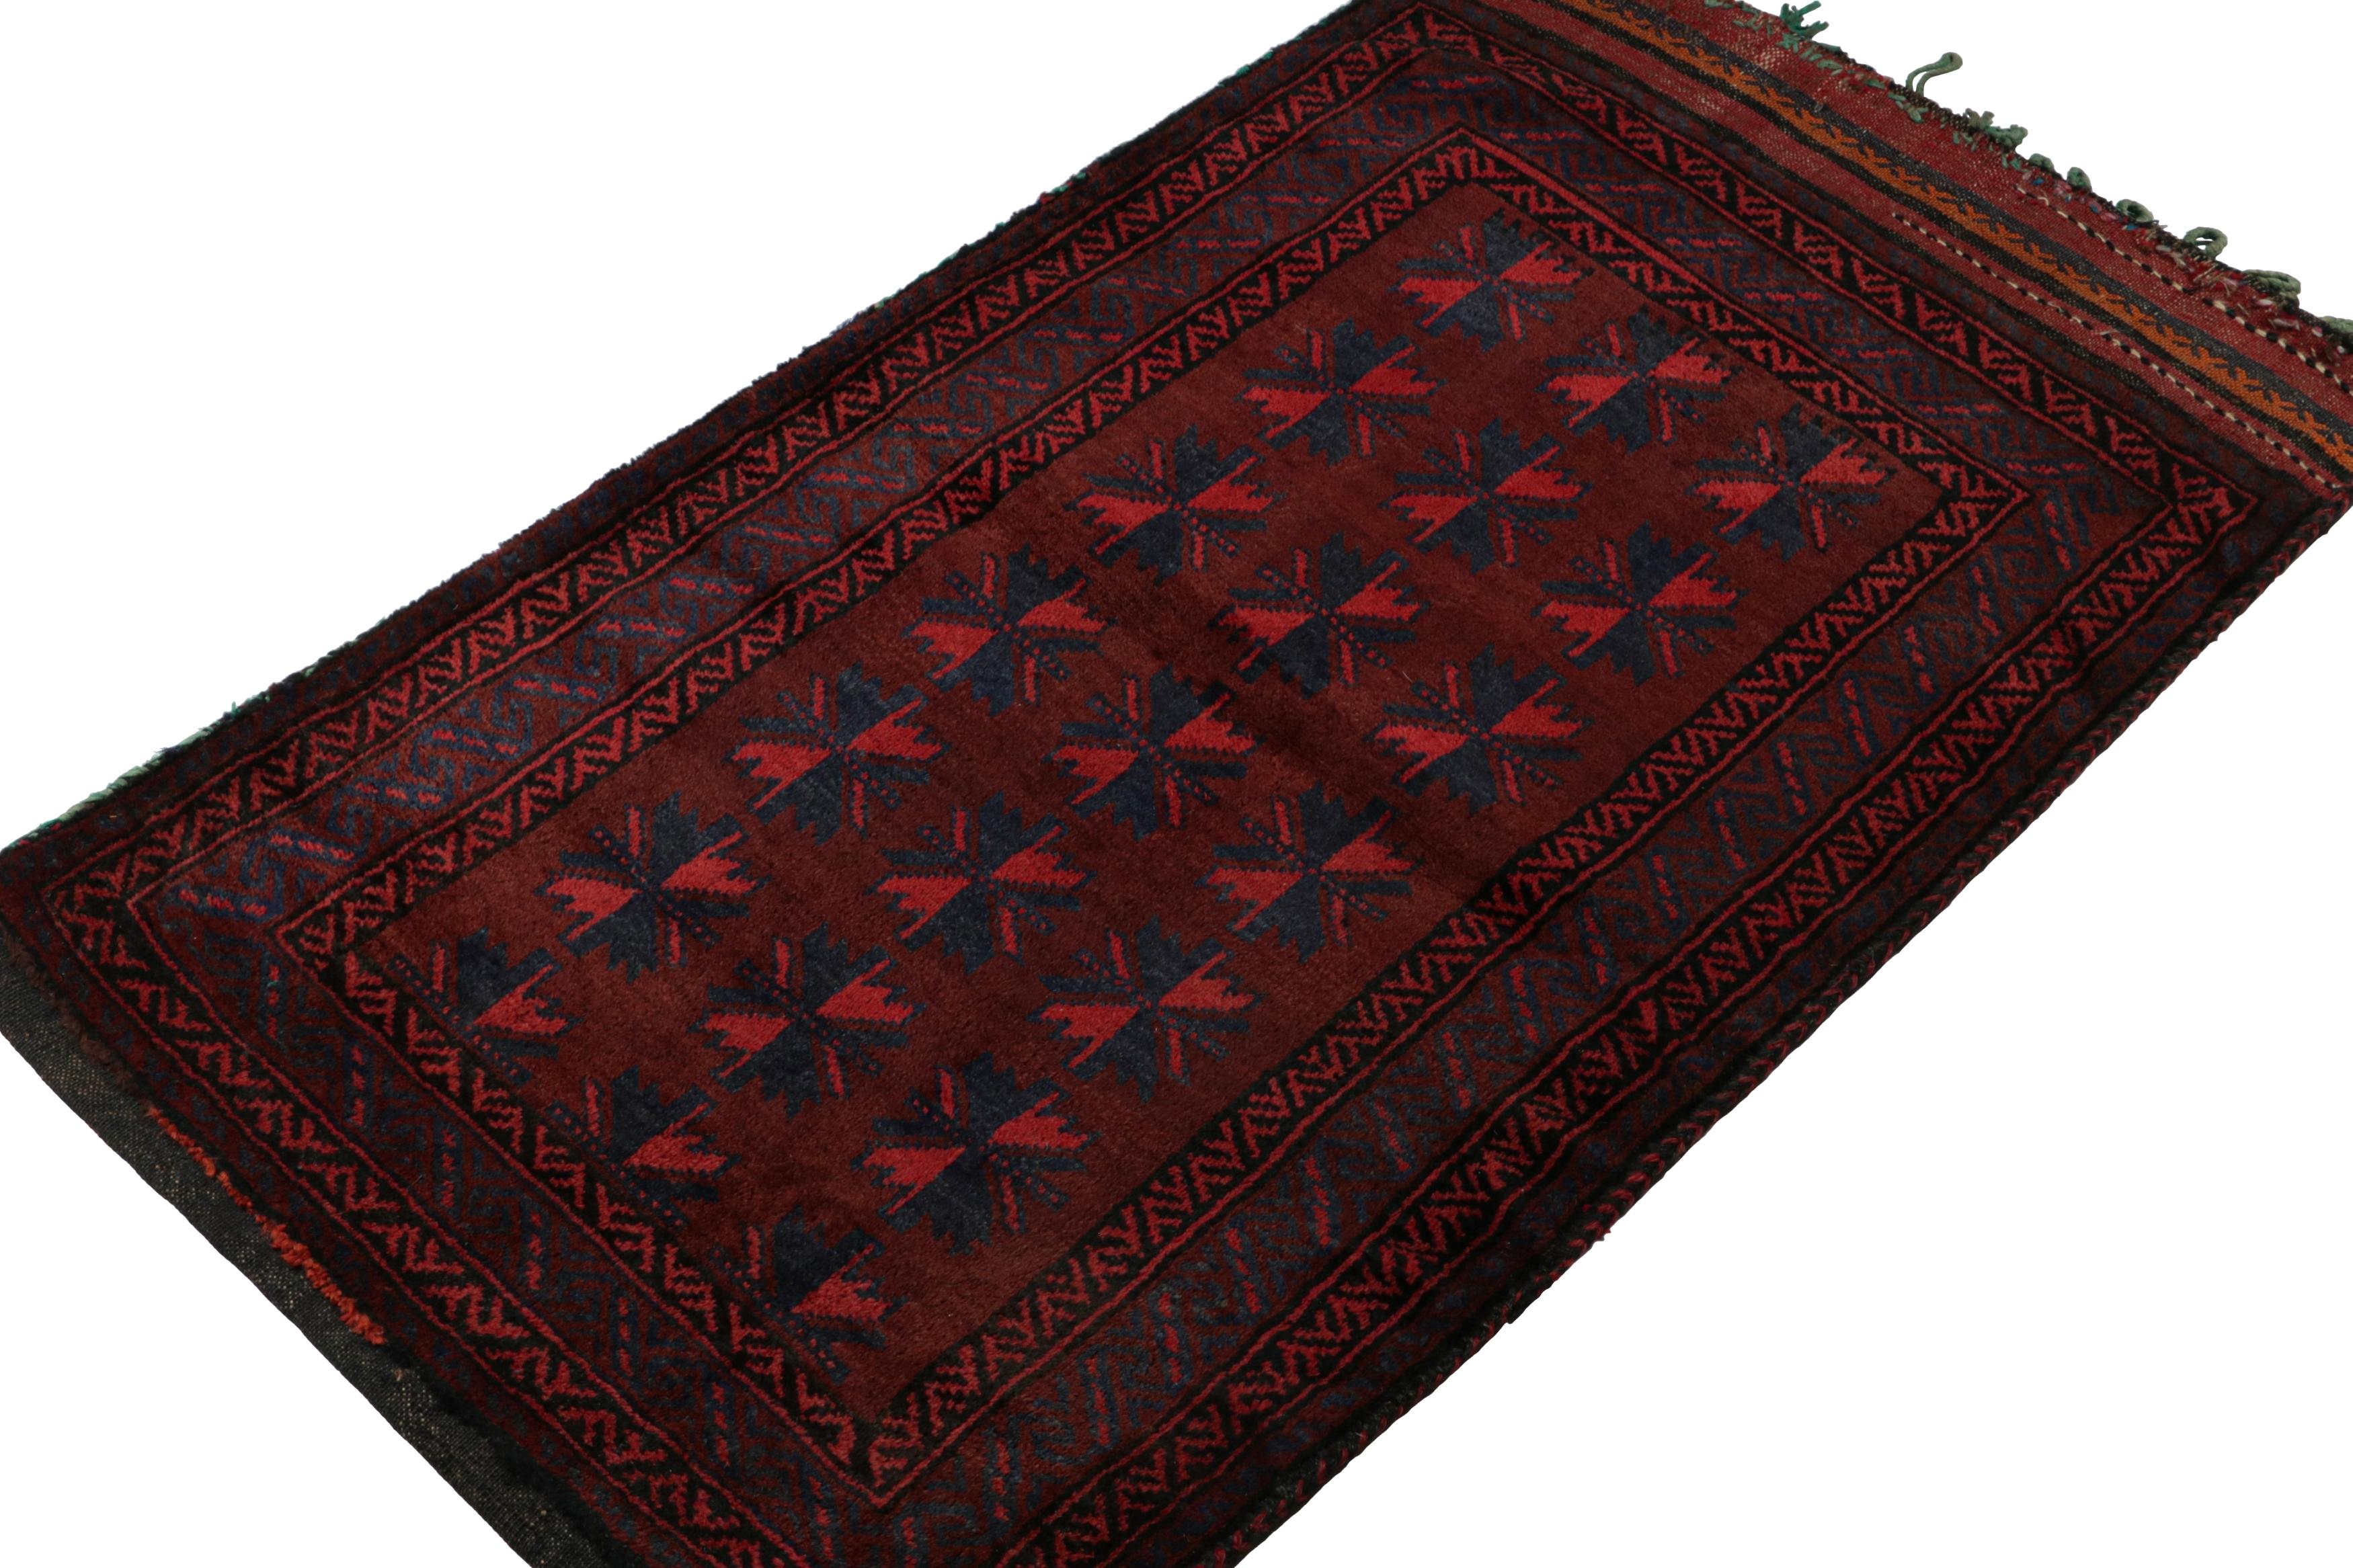 Hand-knotted in wool, this 2x4 Baluch Persian rug of the 1950s is one of the latest to enter Rug & Kilim’s Antique & Vintage collection.

On the Design:

The Persian Baluch rug carries a defined movement with tribal patterns in rich tones of red,